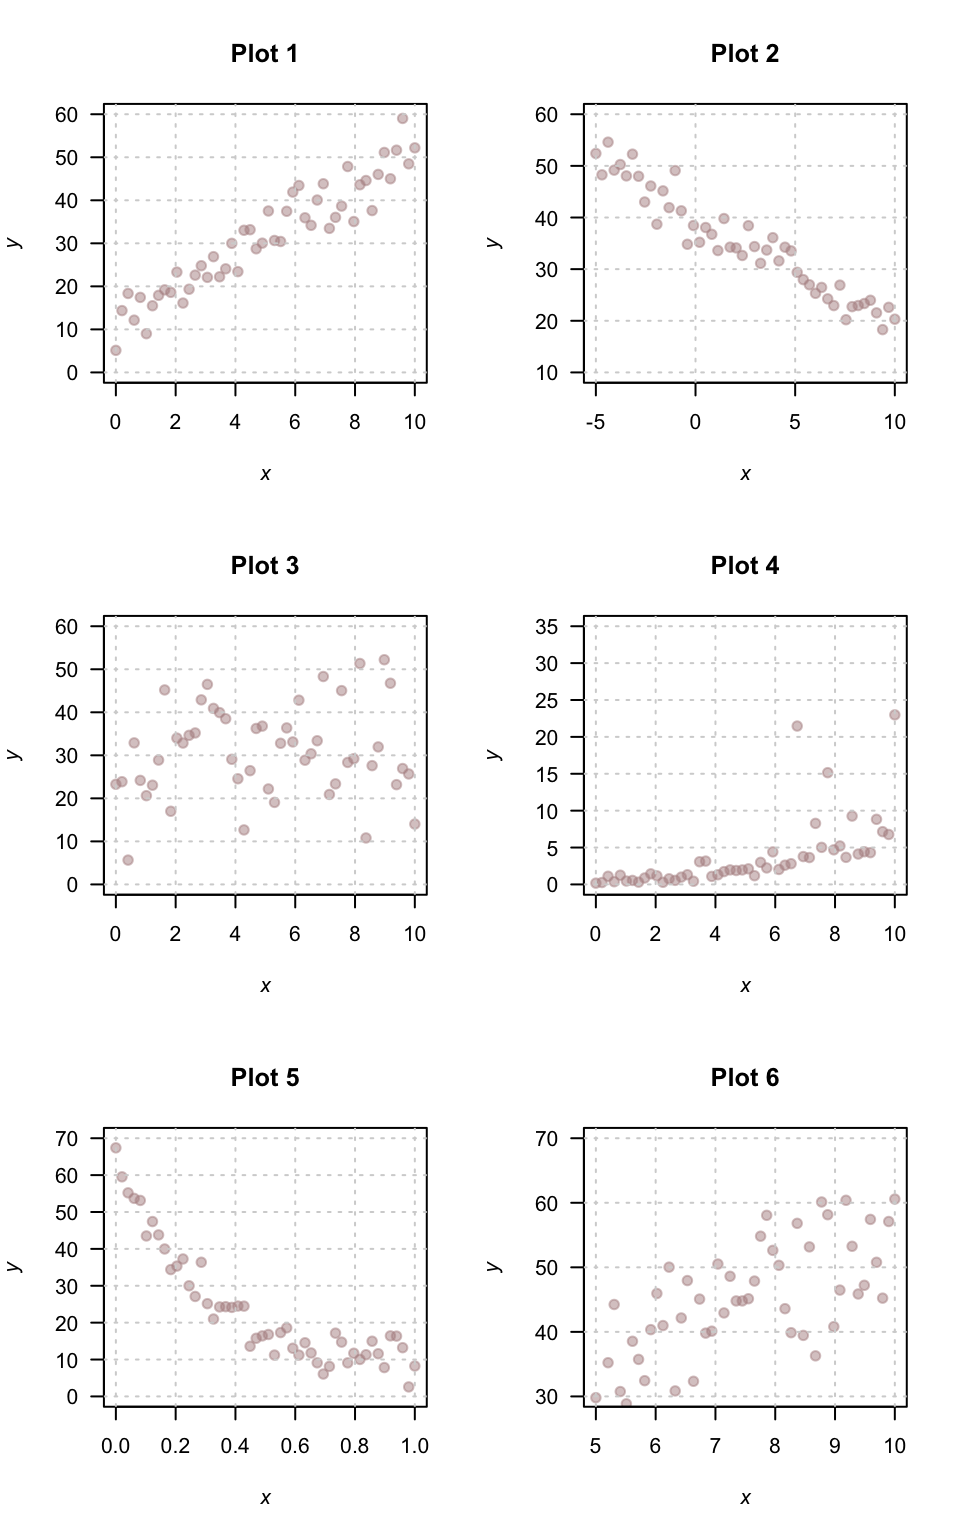 Six different scatterplots